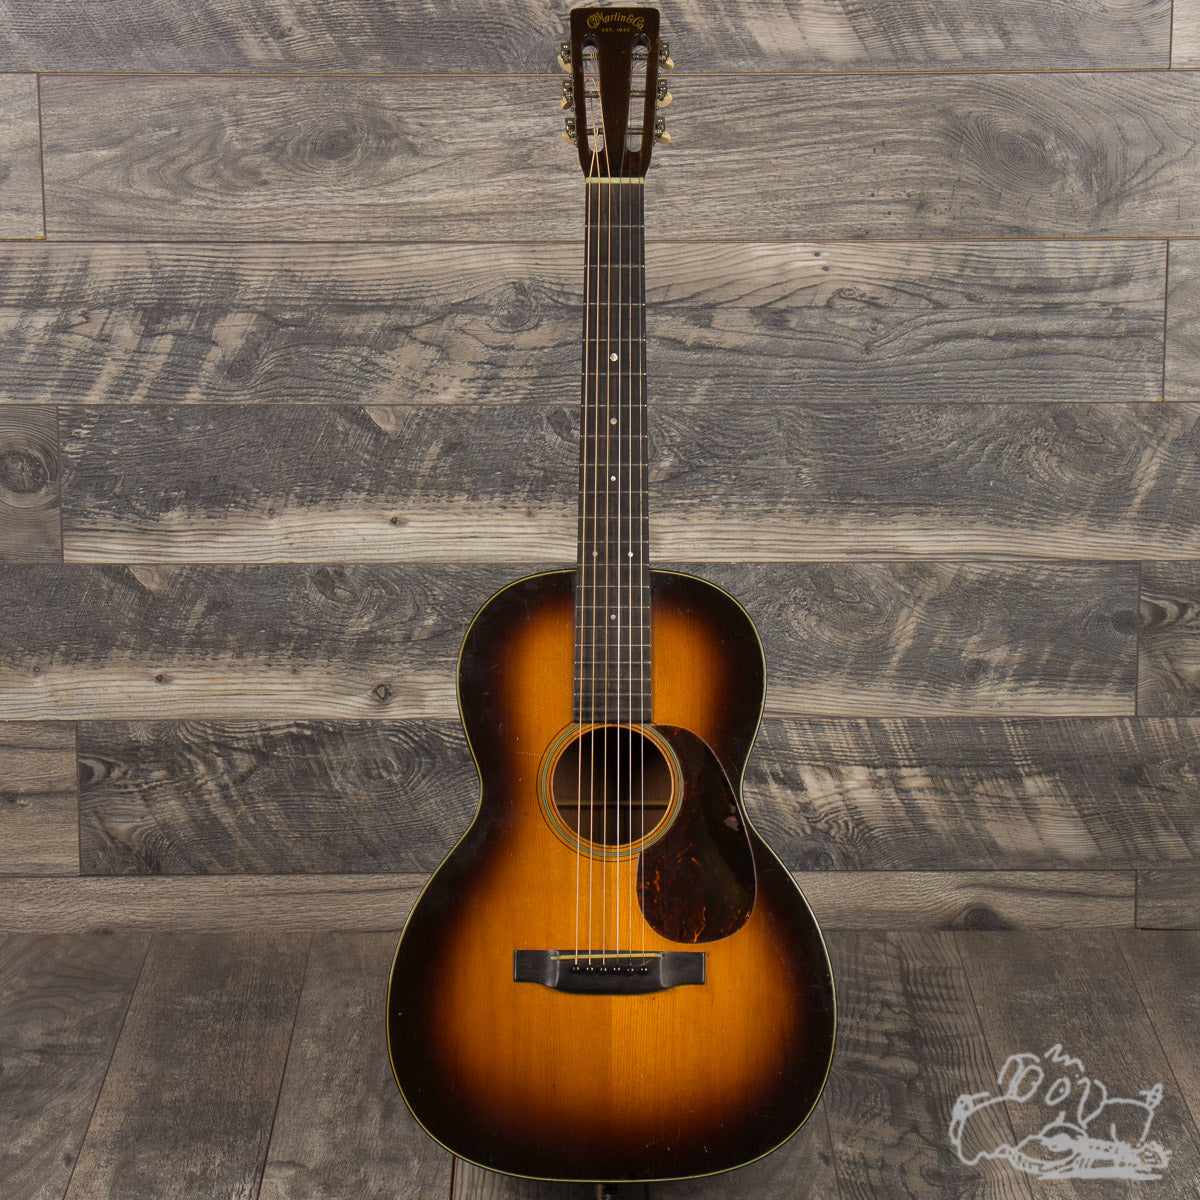 Guitar of the Day: 1937 Martin 00-40H